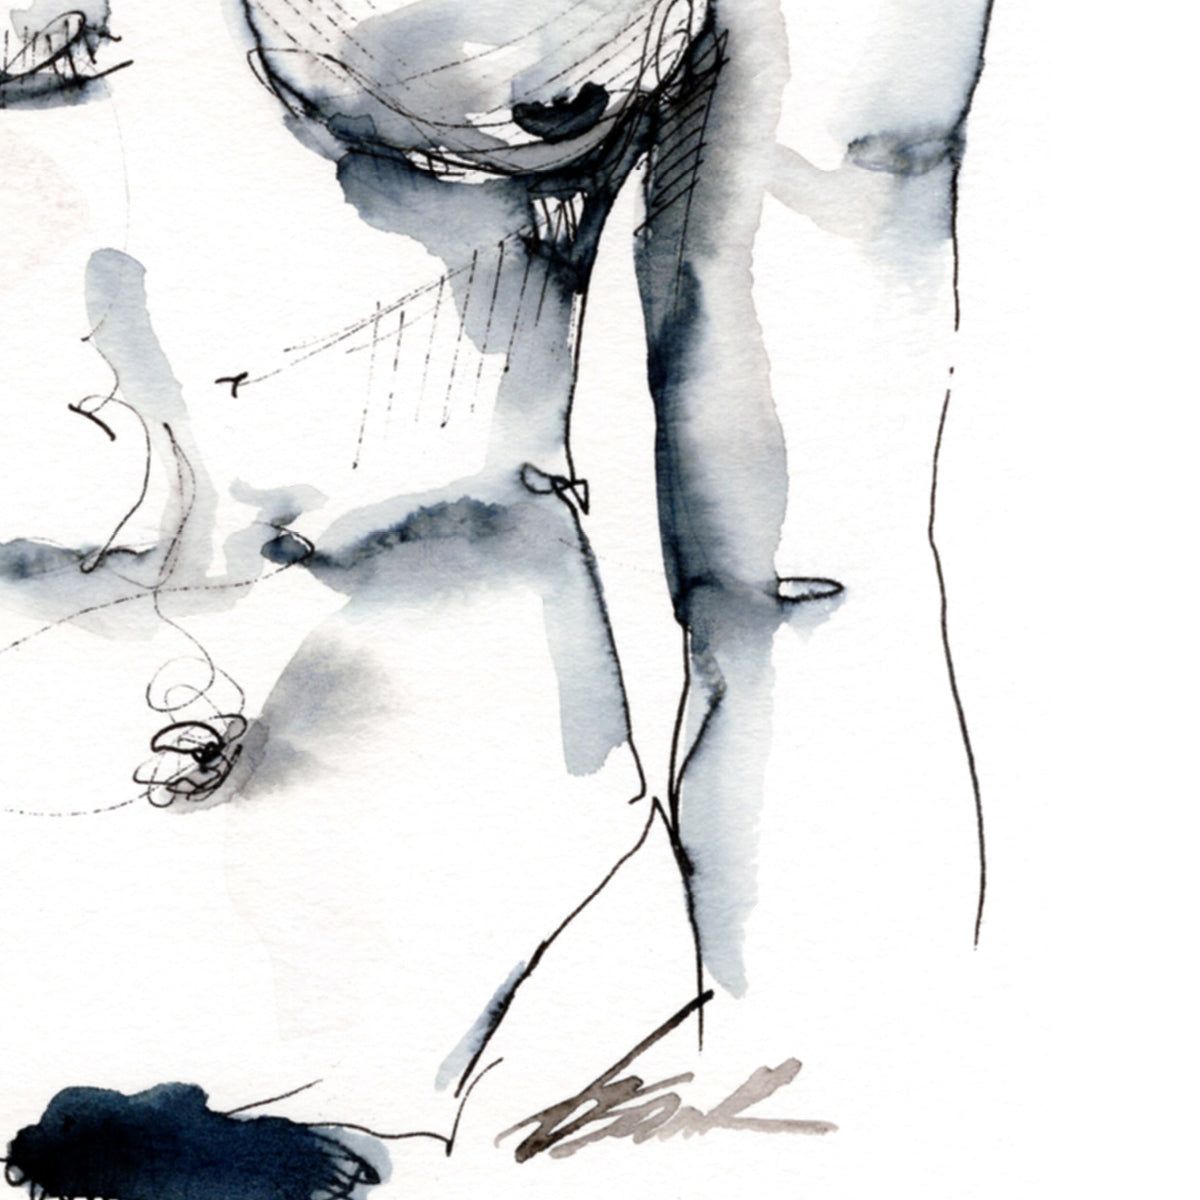 Stoic Shadows - Ink Defined Muscular Form - 6x9" Original Painting